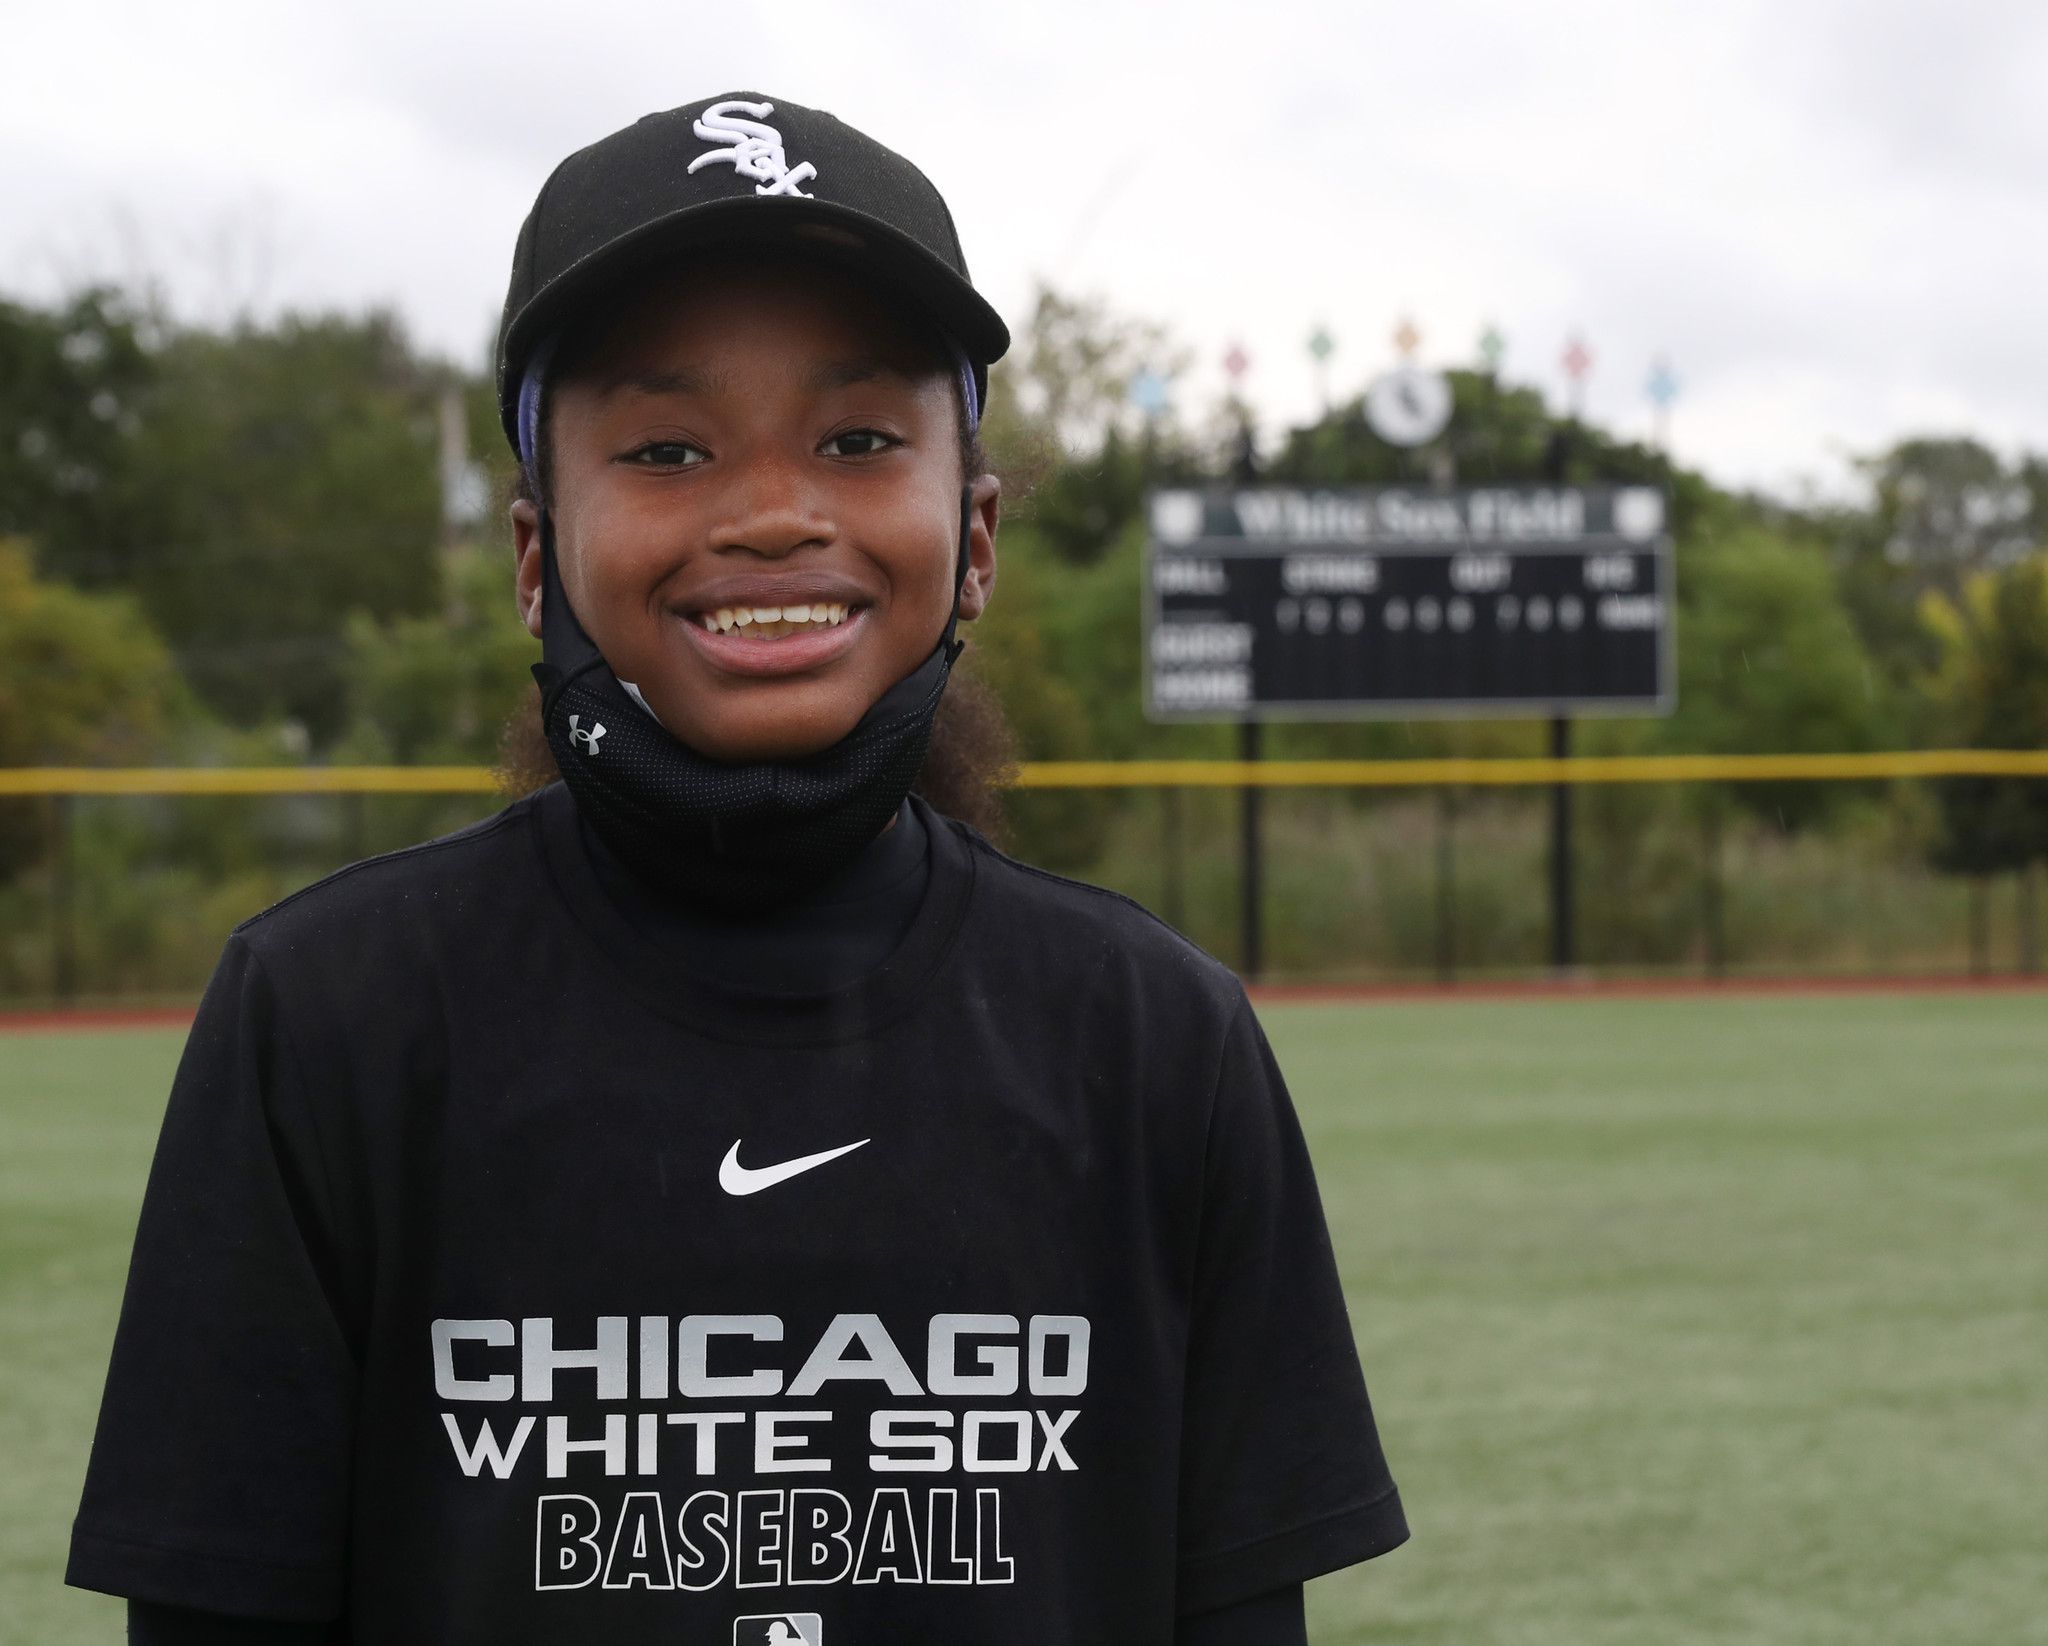 Chicago White Sox: Meet the 1st girl selected to the ACE program